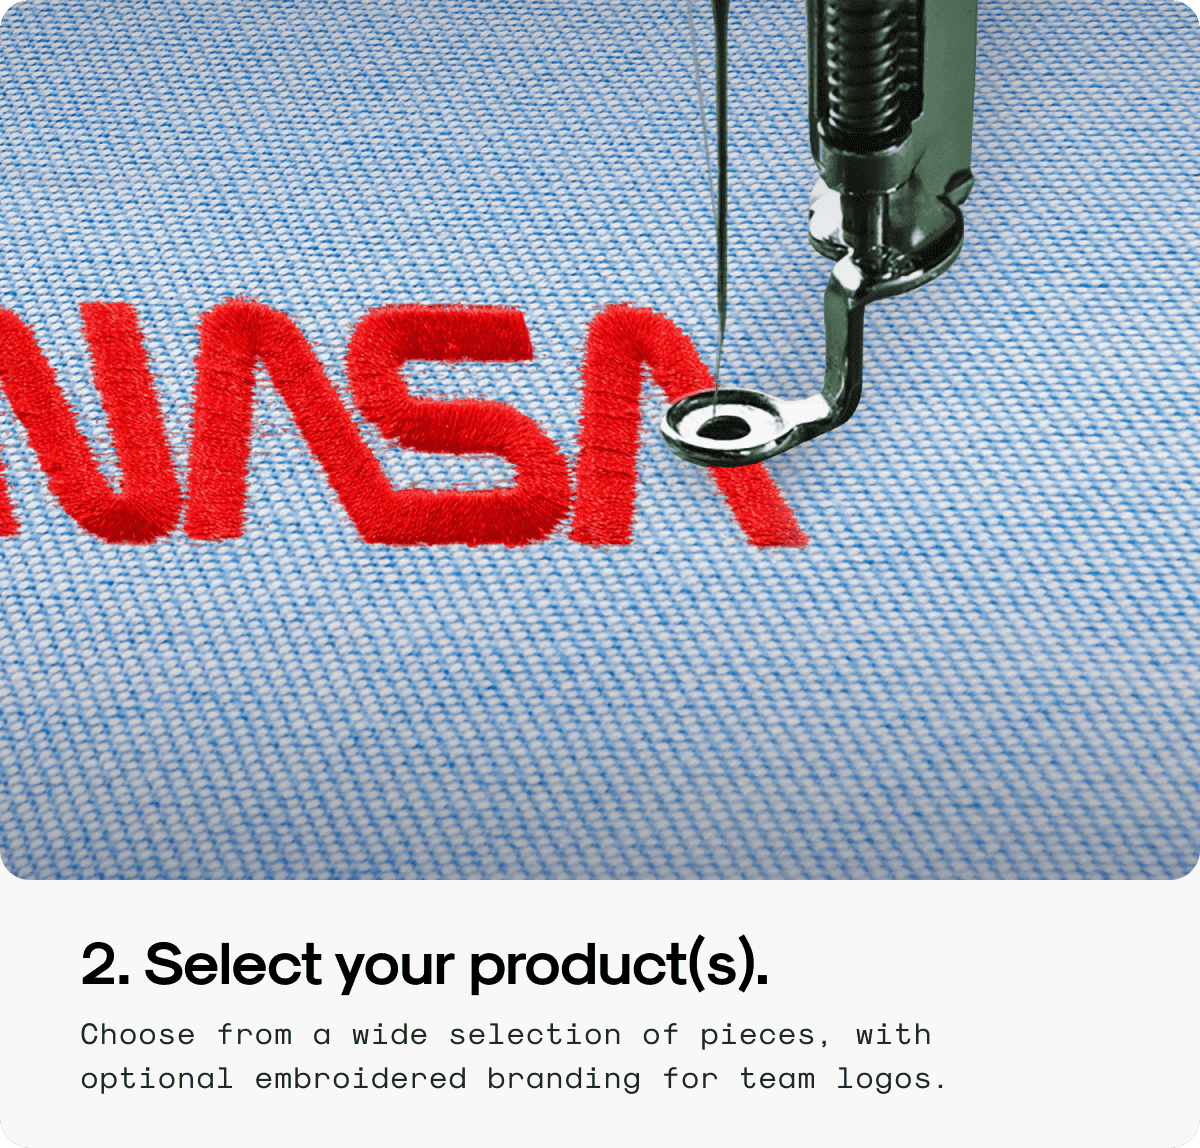 2. Select your product(s).